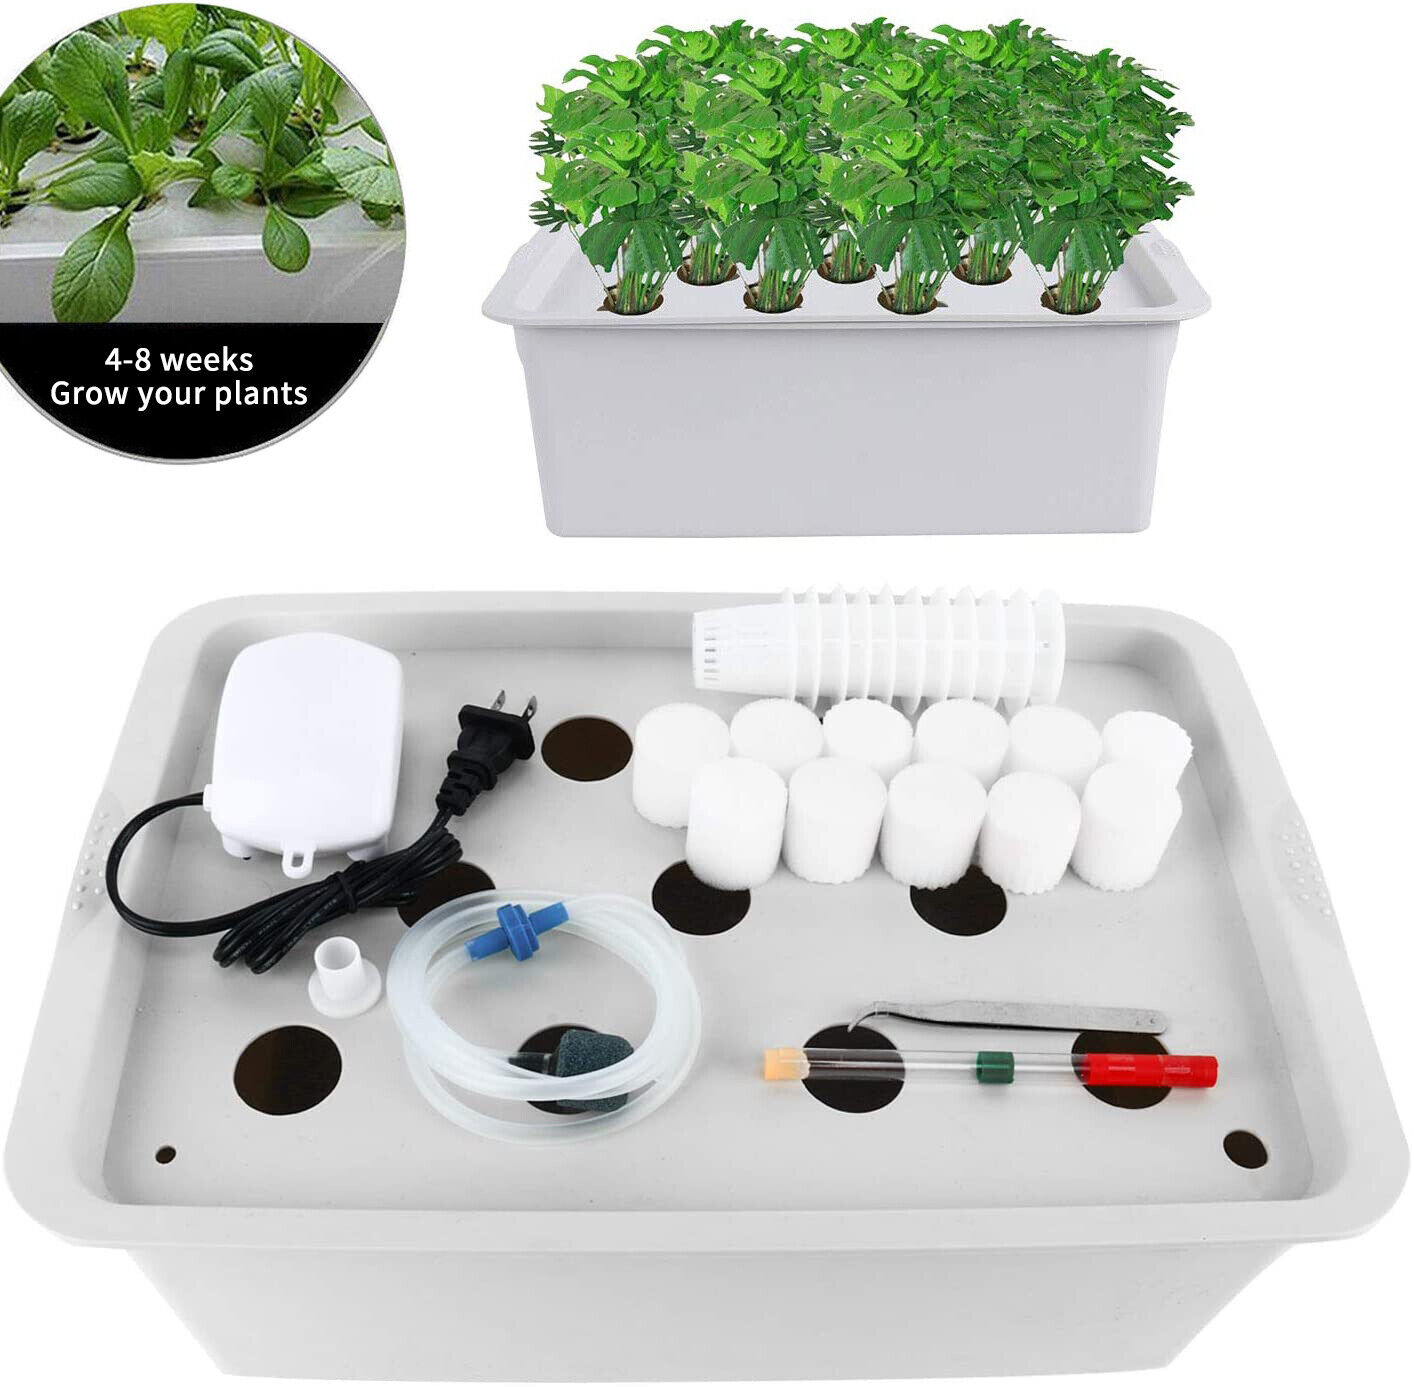 11 Holes Hydroponic Grow Kit Plant Site Best Indoor Herb Garden Home Cabinet Box